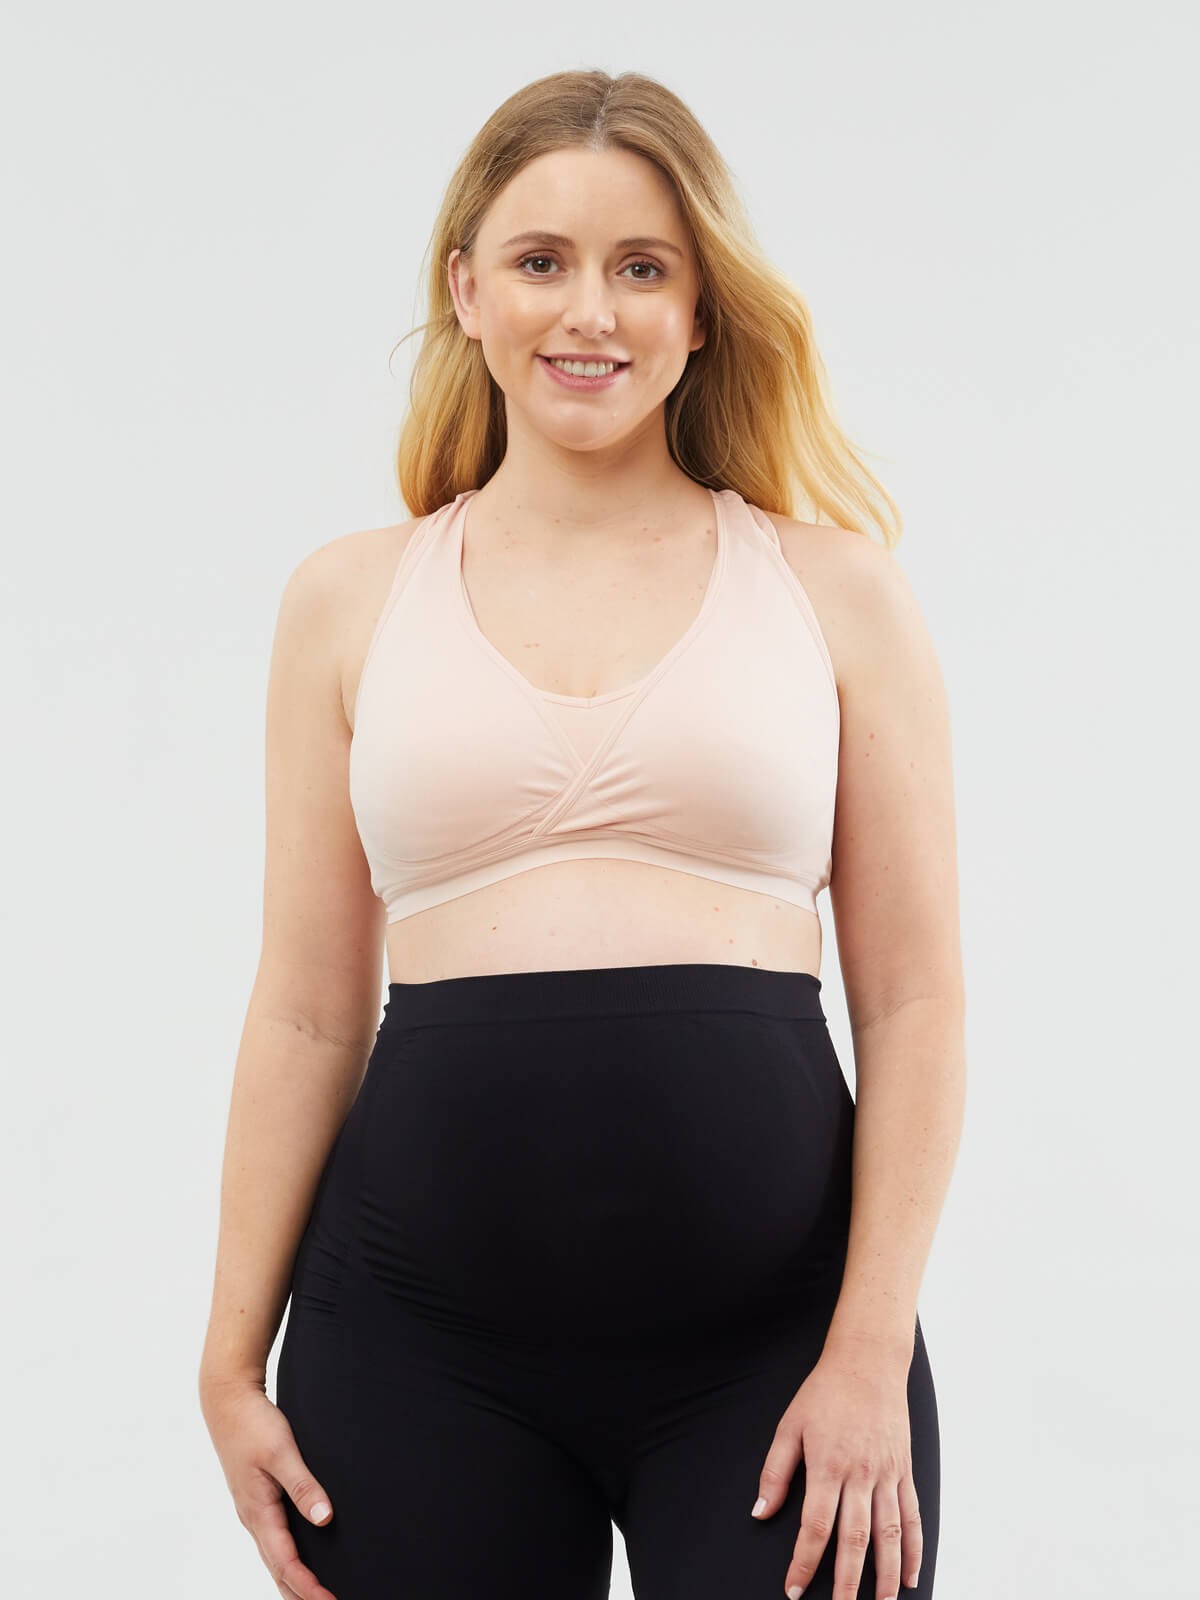 Cake Maternity Lotus Yoga & Hands Free Pumping E-Ff Cup Wire-Free Bra -  Curvy